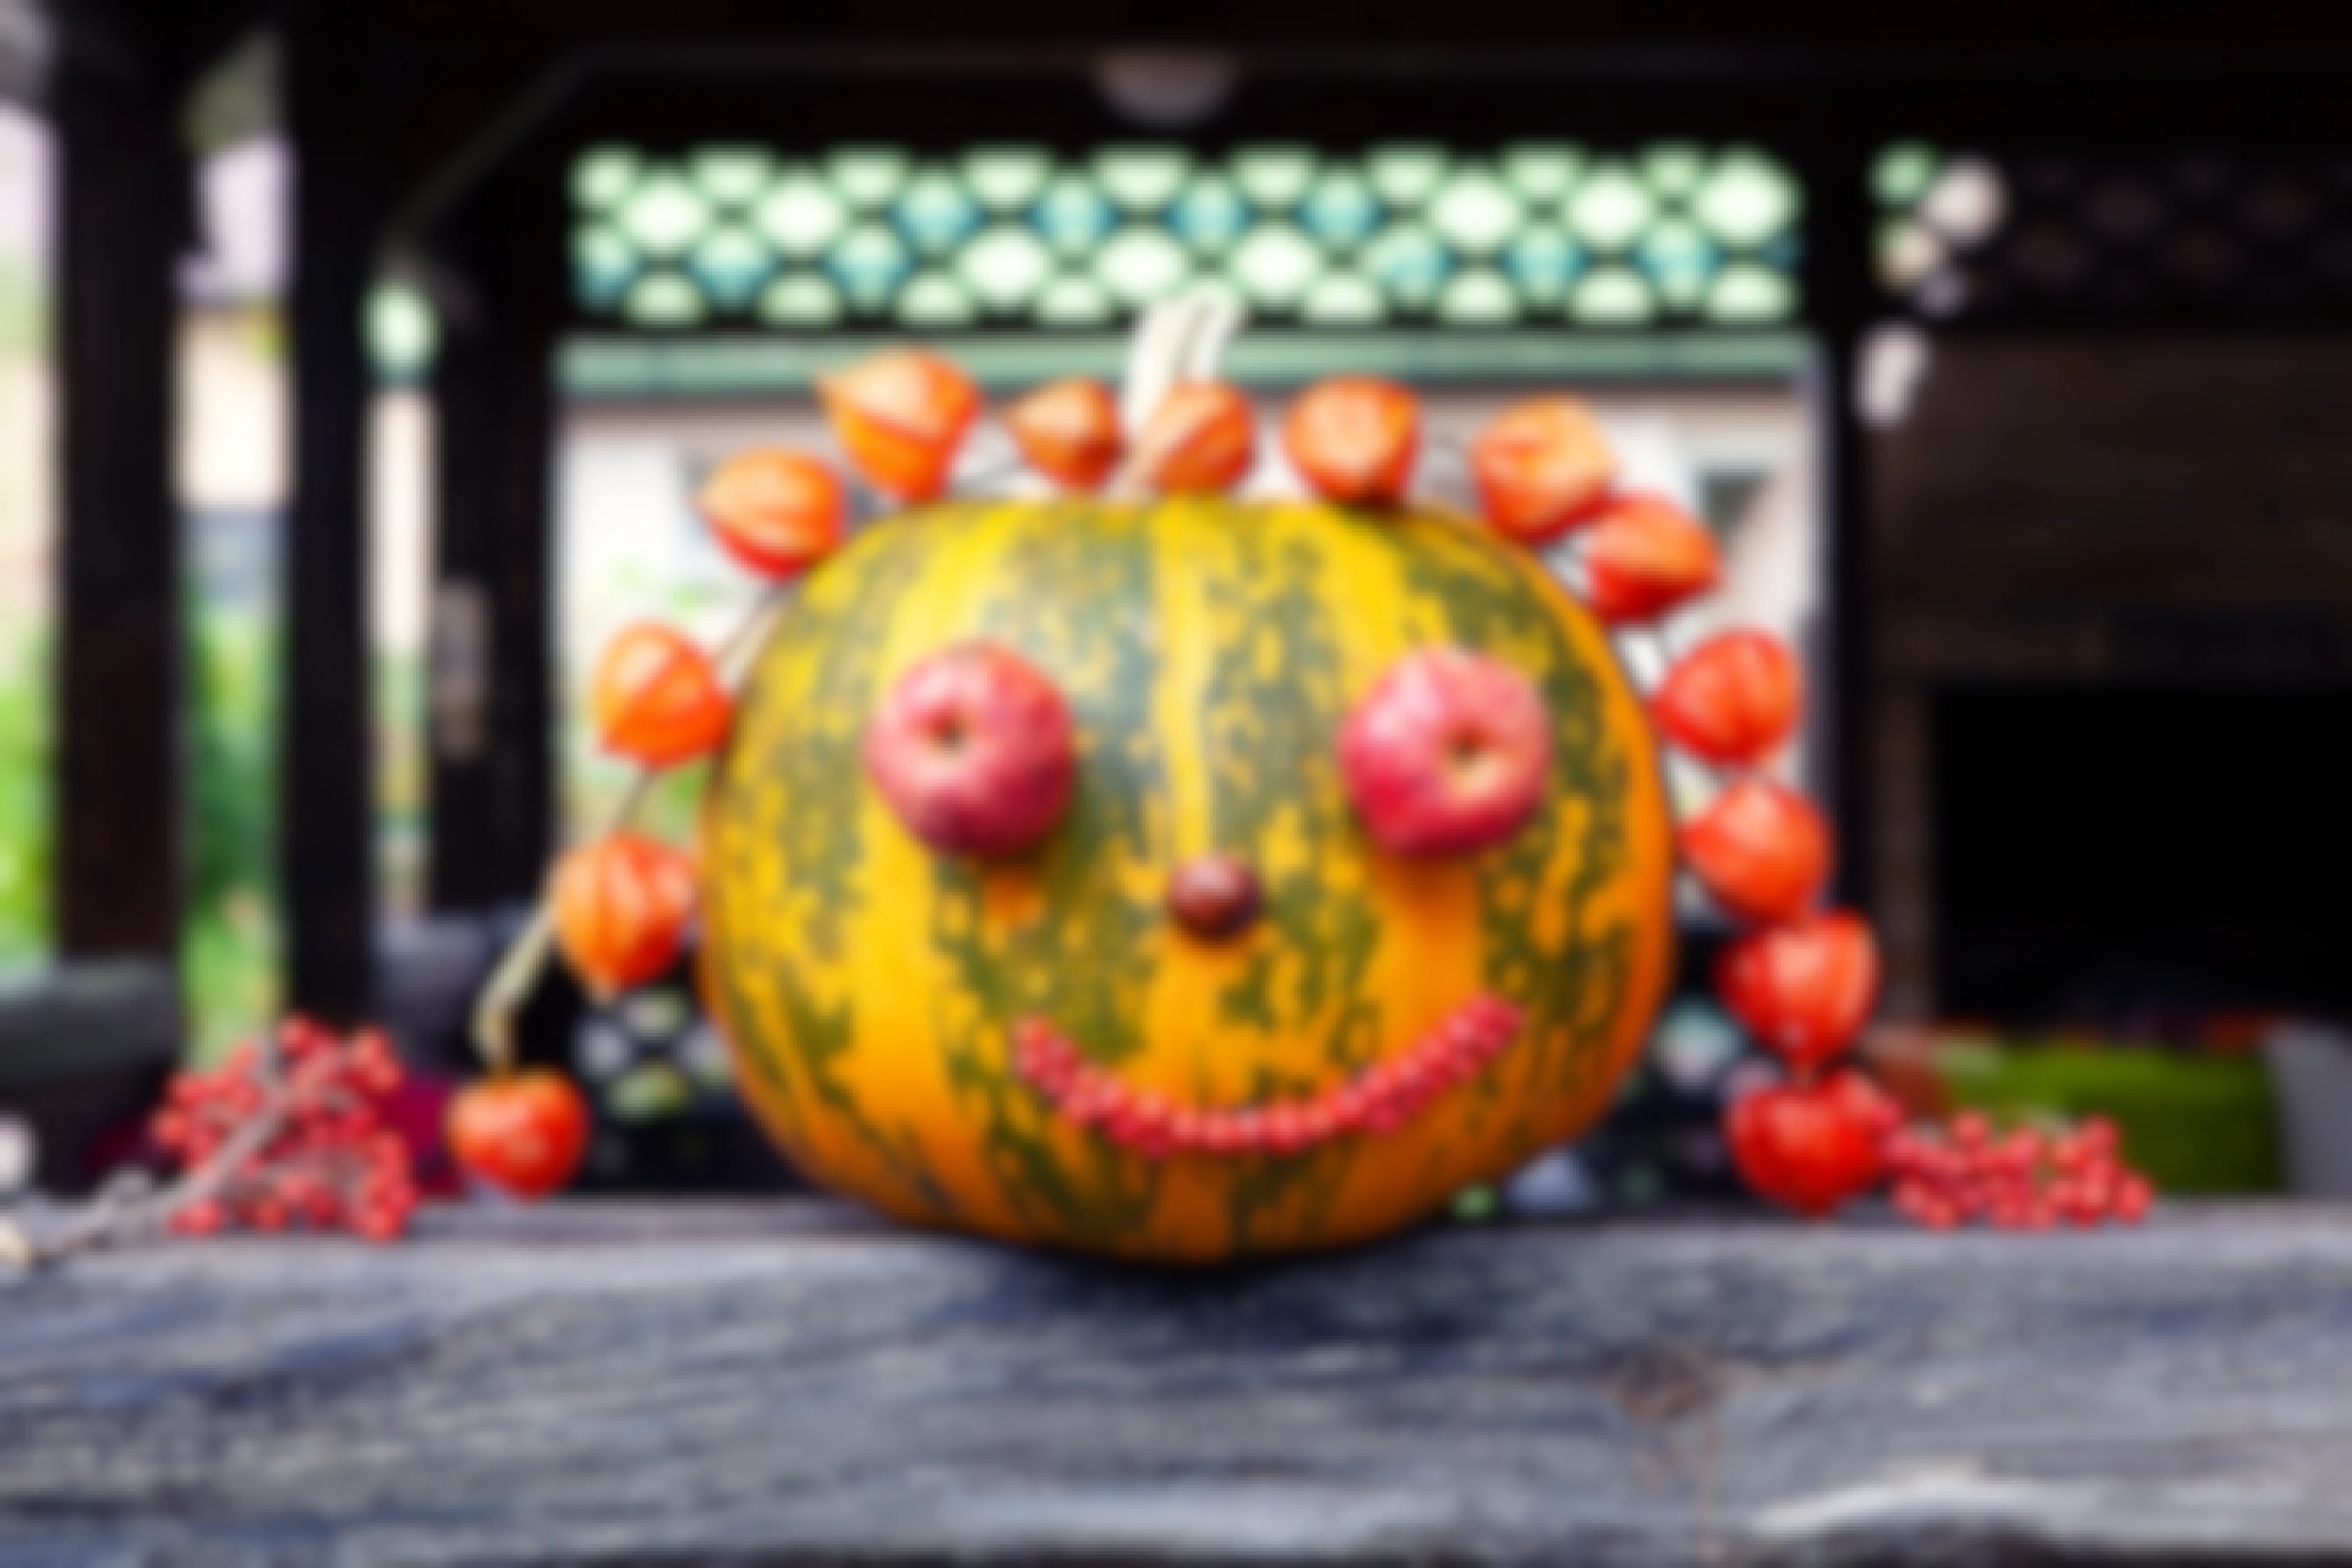 Pumpkin decorated with fruit and vegetables